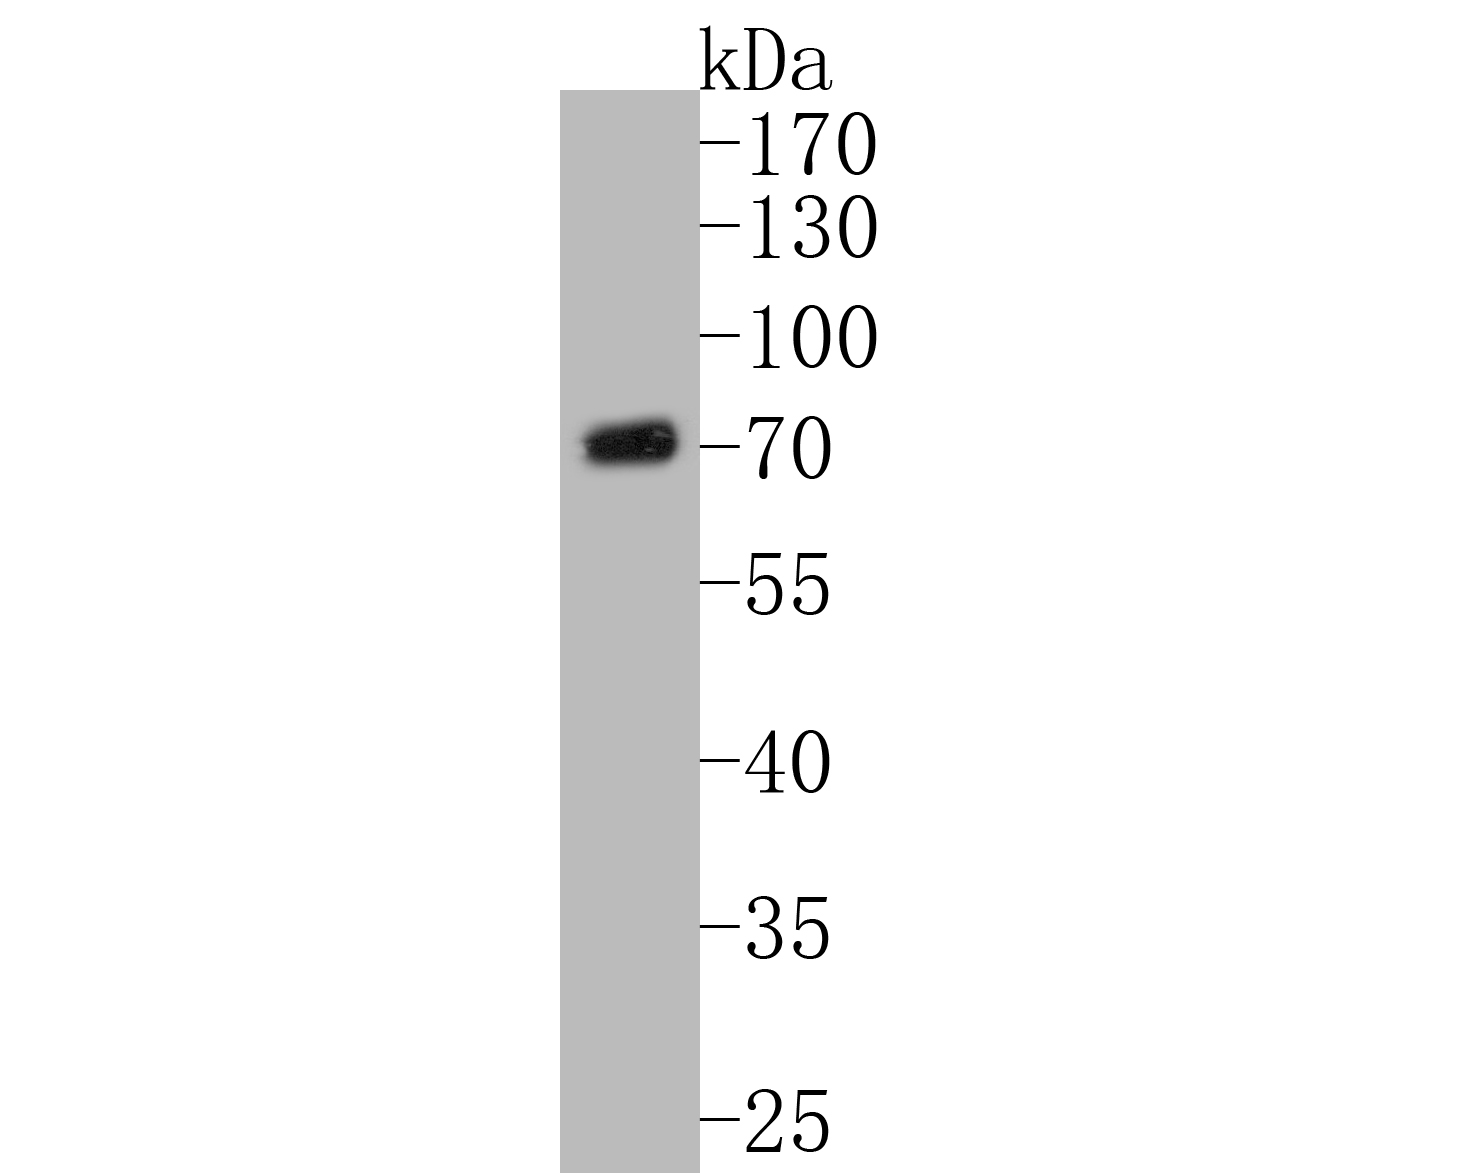 Western blot analysis of CHRNB2 on Jurkat cell lysates. Proteins were transferred to a PVDF membrane and blocked with 5% BSA in PBS for 1 hour at room temperature. The primary antibody (ER1902-95, 1/500) was used in 5% BSA at room temperature for 2 hours. Goat Anti-Rabbit IgG - HRP Secondary Antibody (HA1001) at 1:5,000 dilution was used for 1 hour at room temperature.